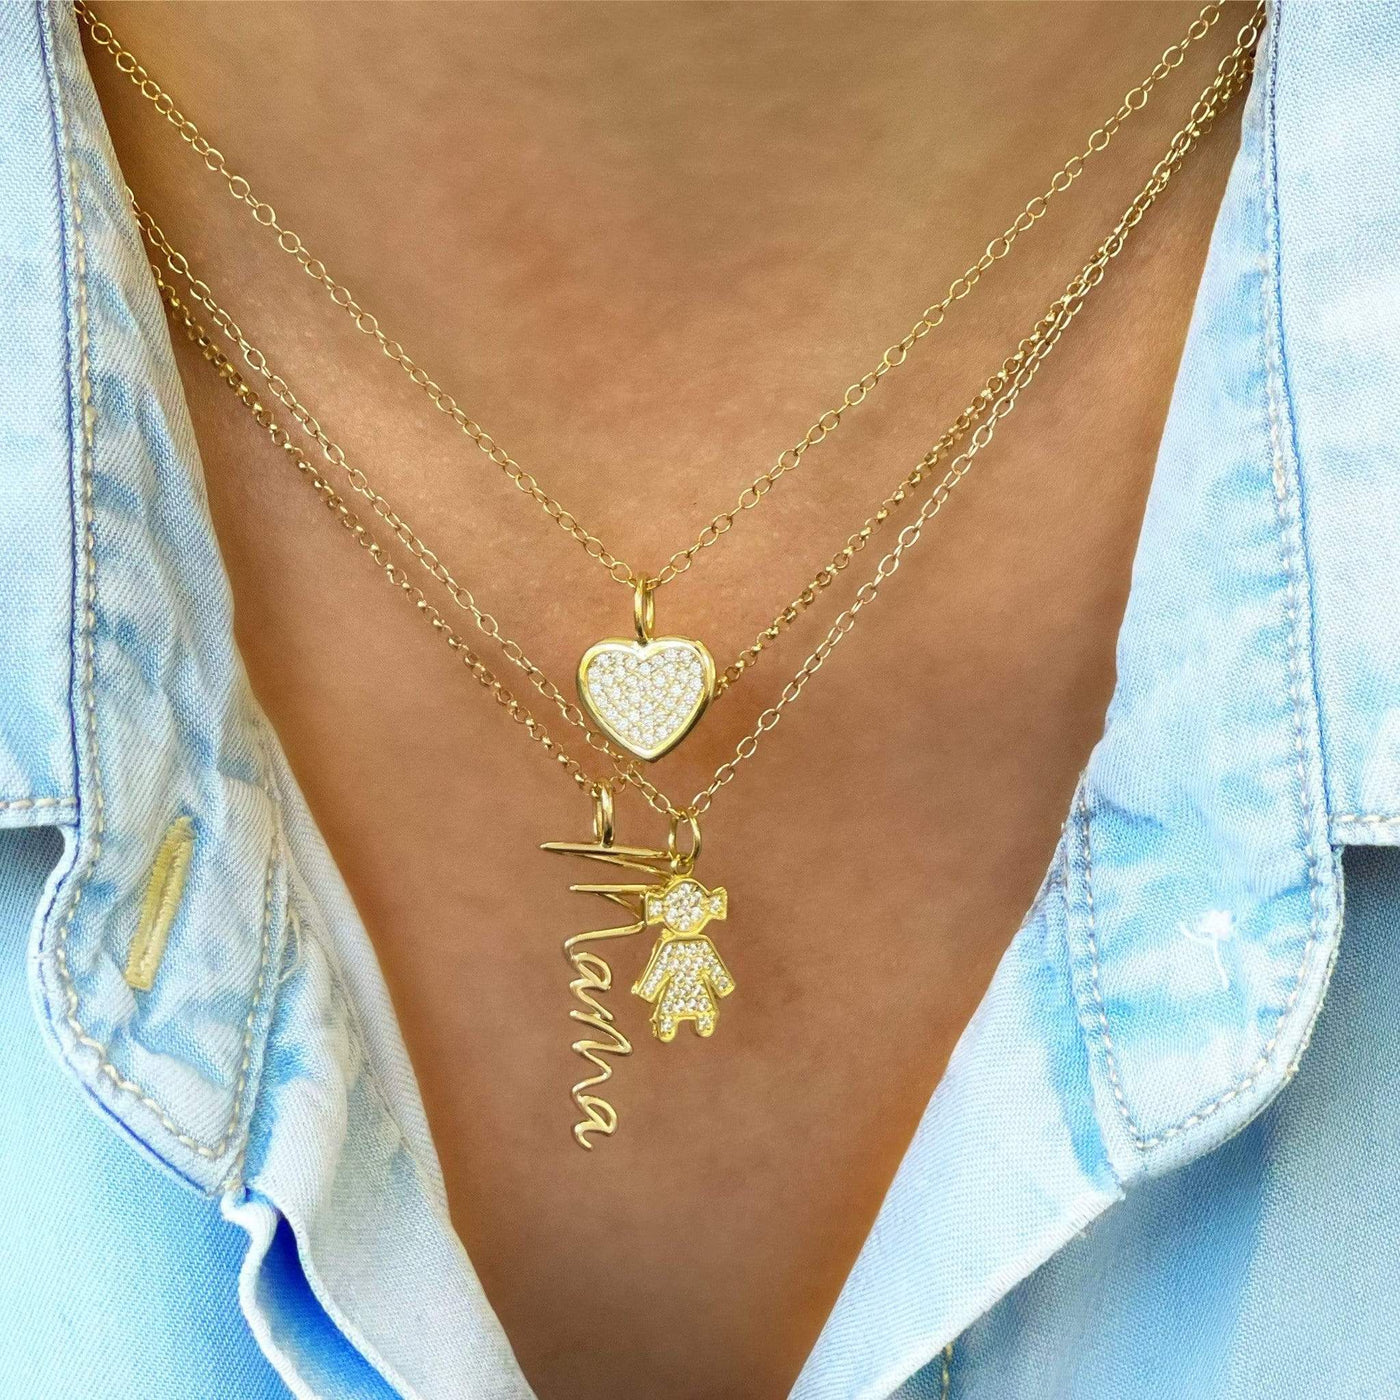 Girl Charm Necklace